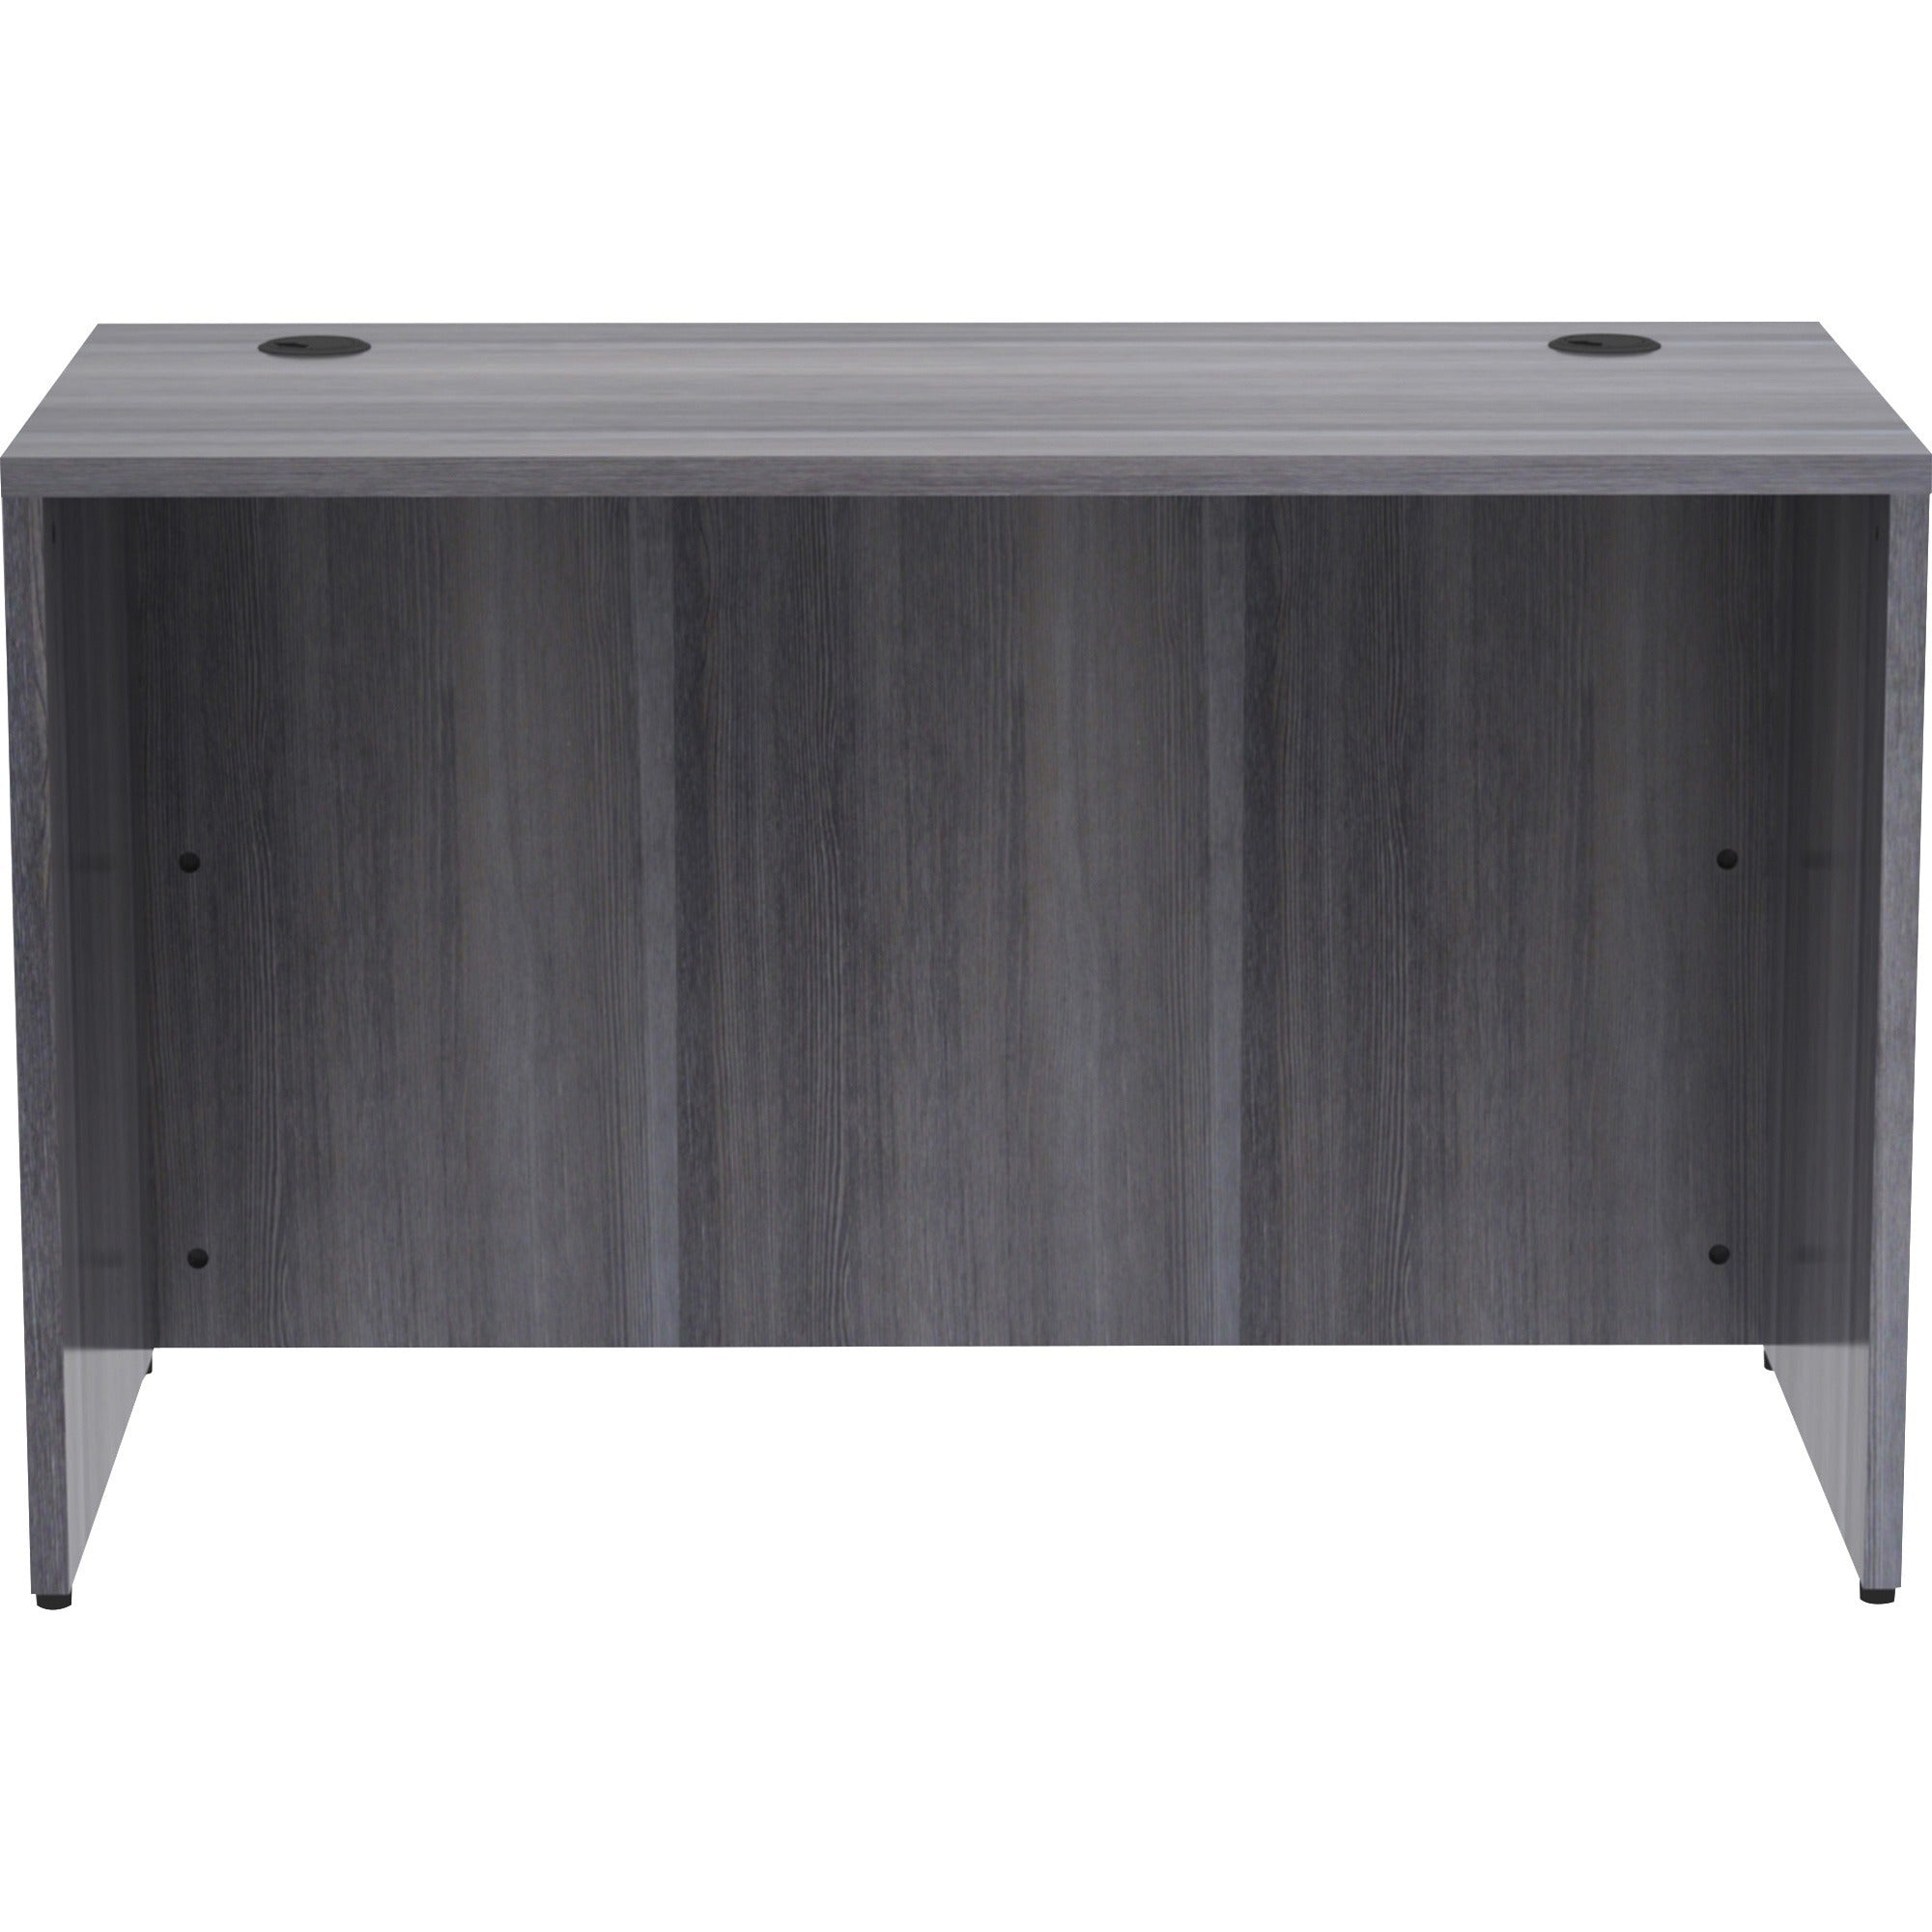 lorell-essentials-series-rectangular-desk-shell-48-x-24295--1-top-laminate-weathered-charcoal-table-top-grommet_llr69549 - 4